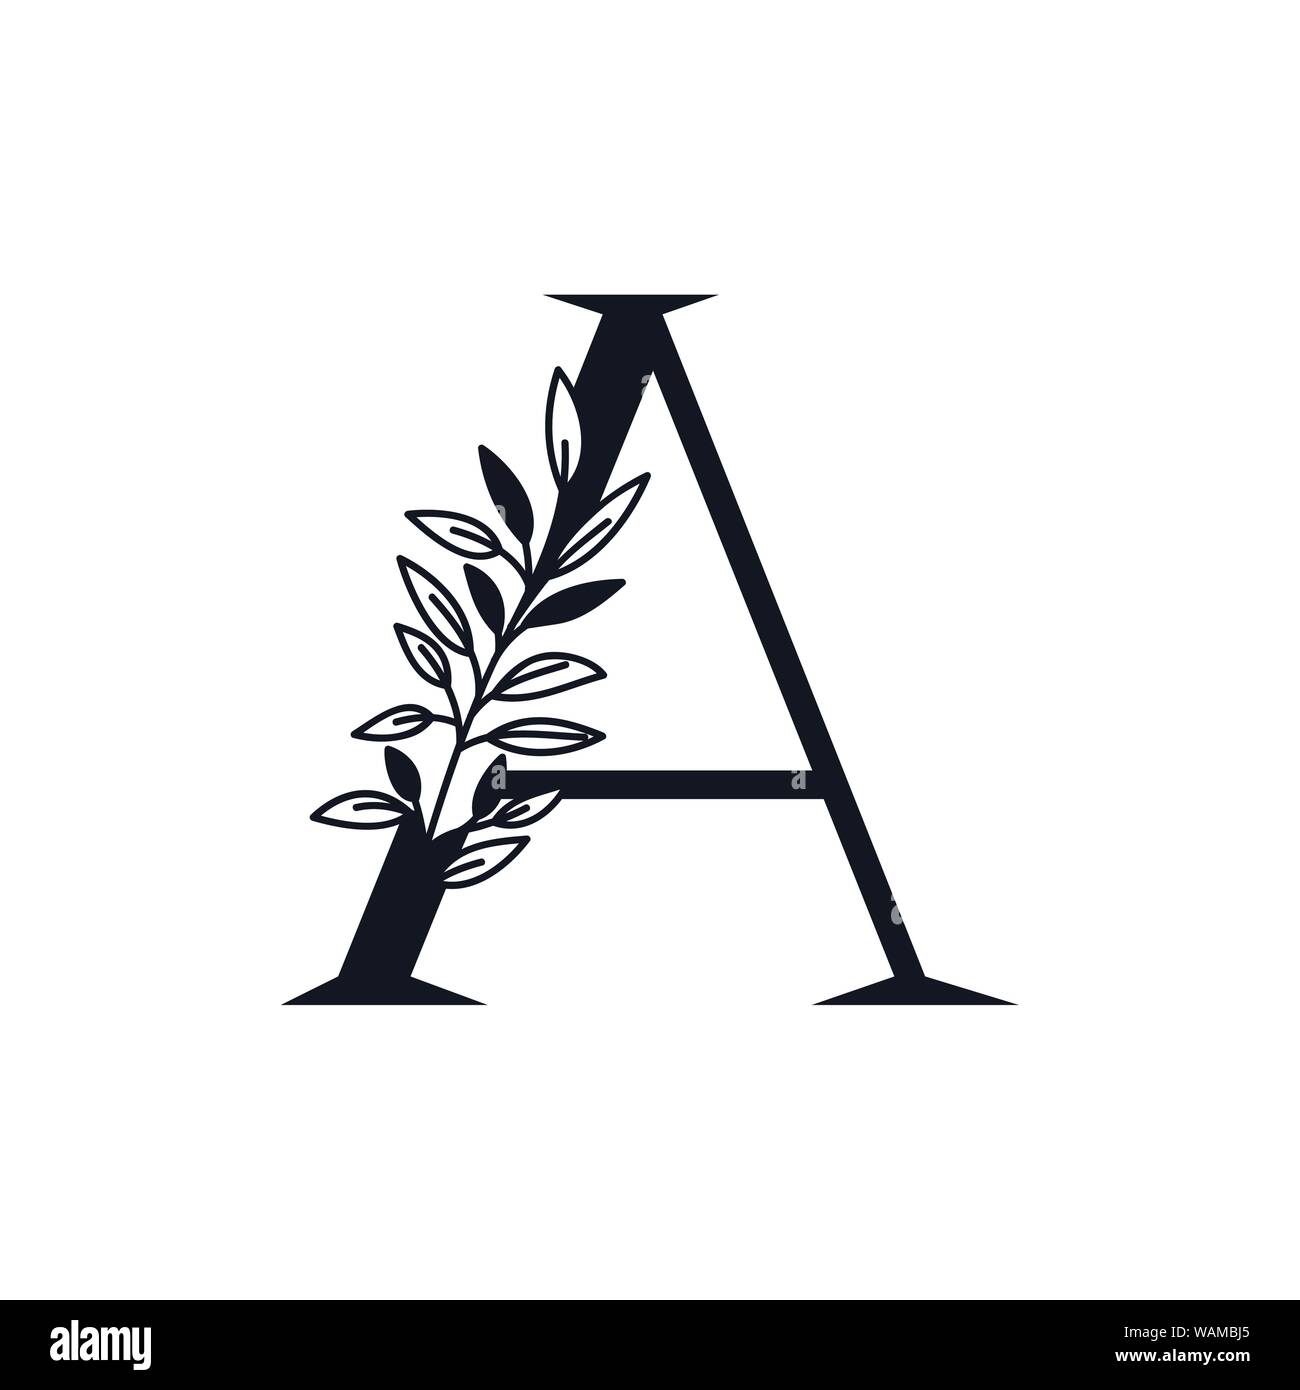 Letter A Calligraphy High Resolution Stock Photography and Images - Alamy